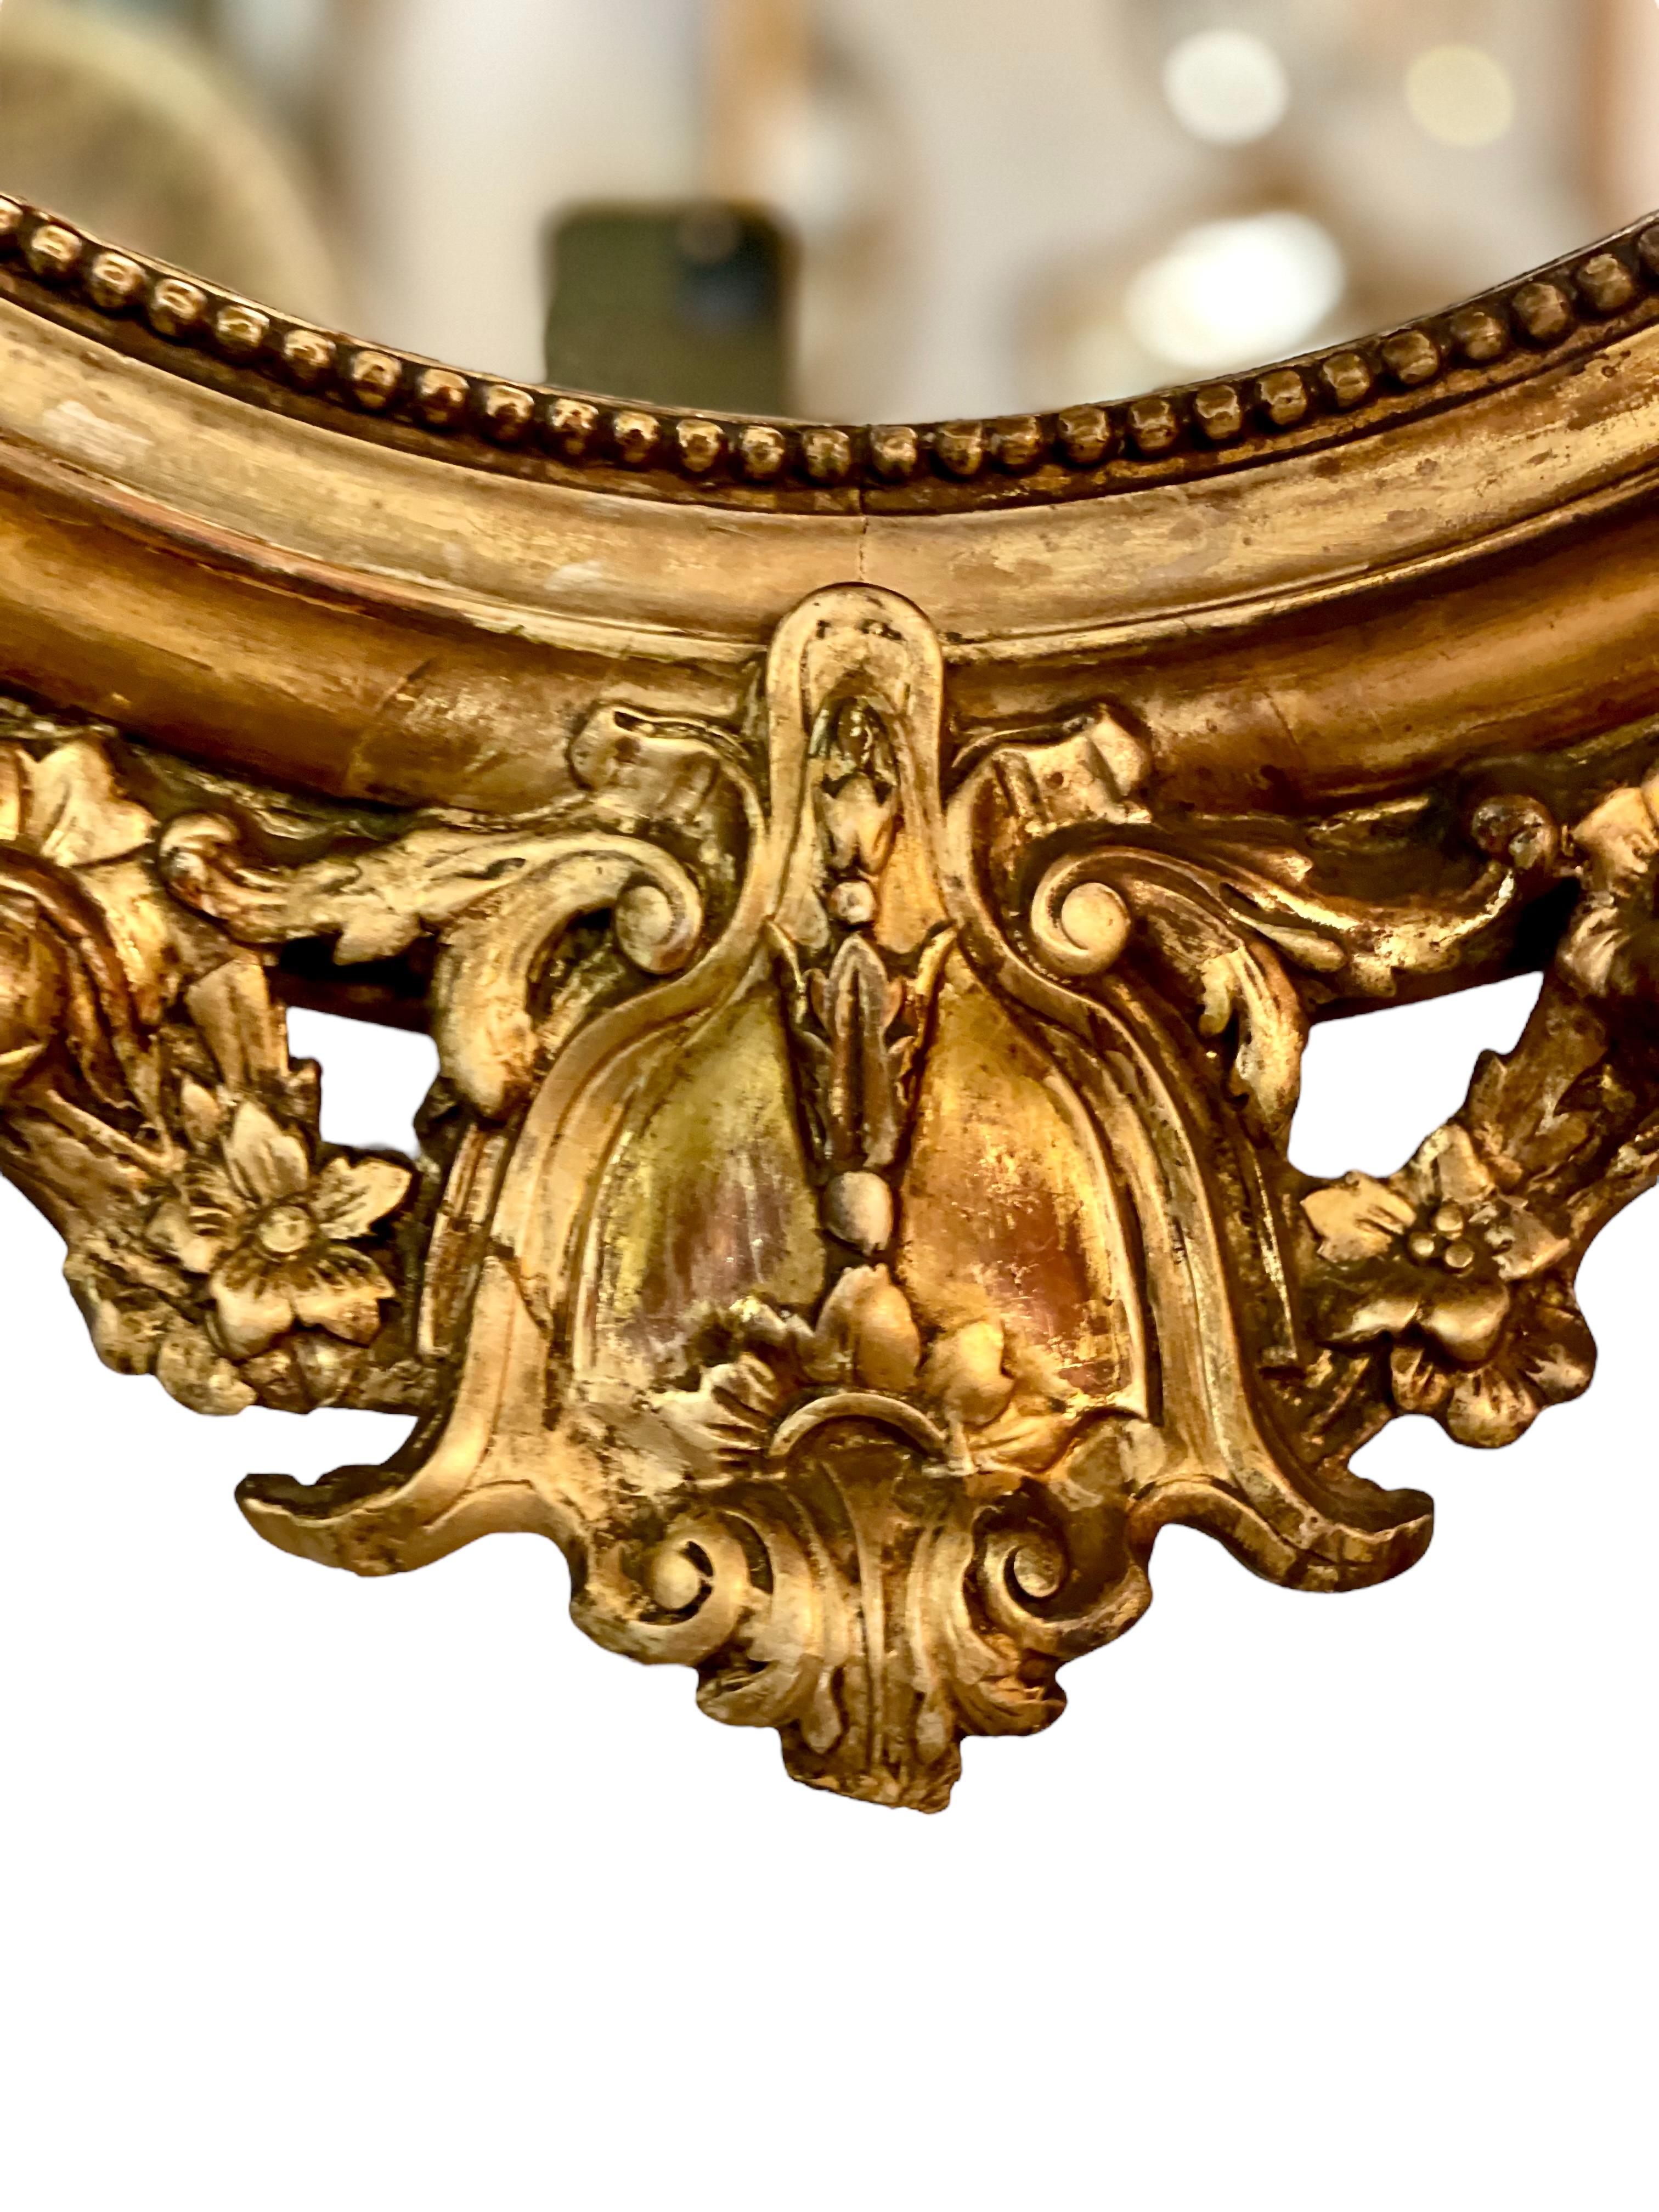 A very striking oval mirror in wood and gilded plaster, dating from the late 19th century. This stunning antique mirror features at its crest an intricate medallion-shaped pediment complete with miniature oval mirror, flanked on either side by